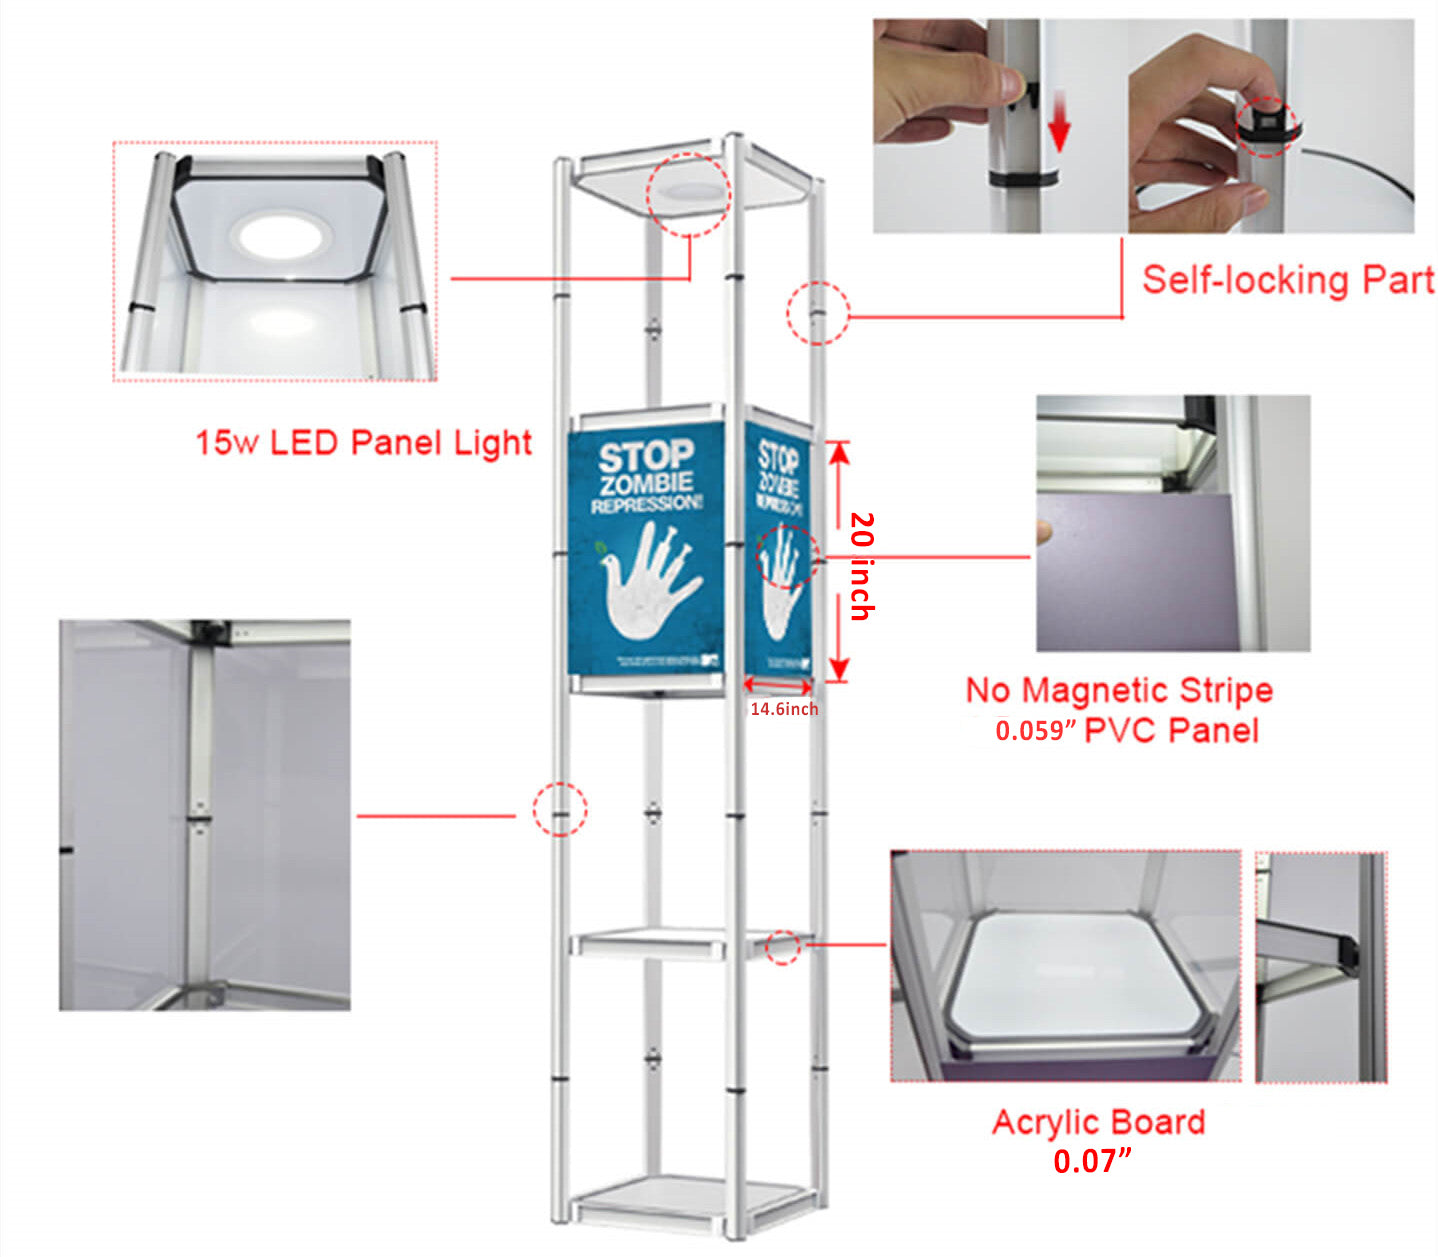 Square Portable Aluminum Spiral Tower Display - 5 Layer Shelves - Backdropsource